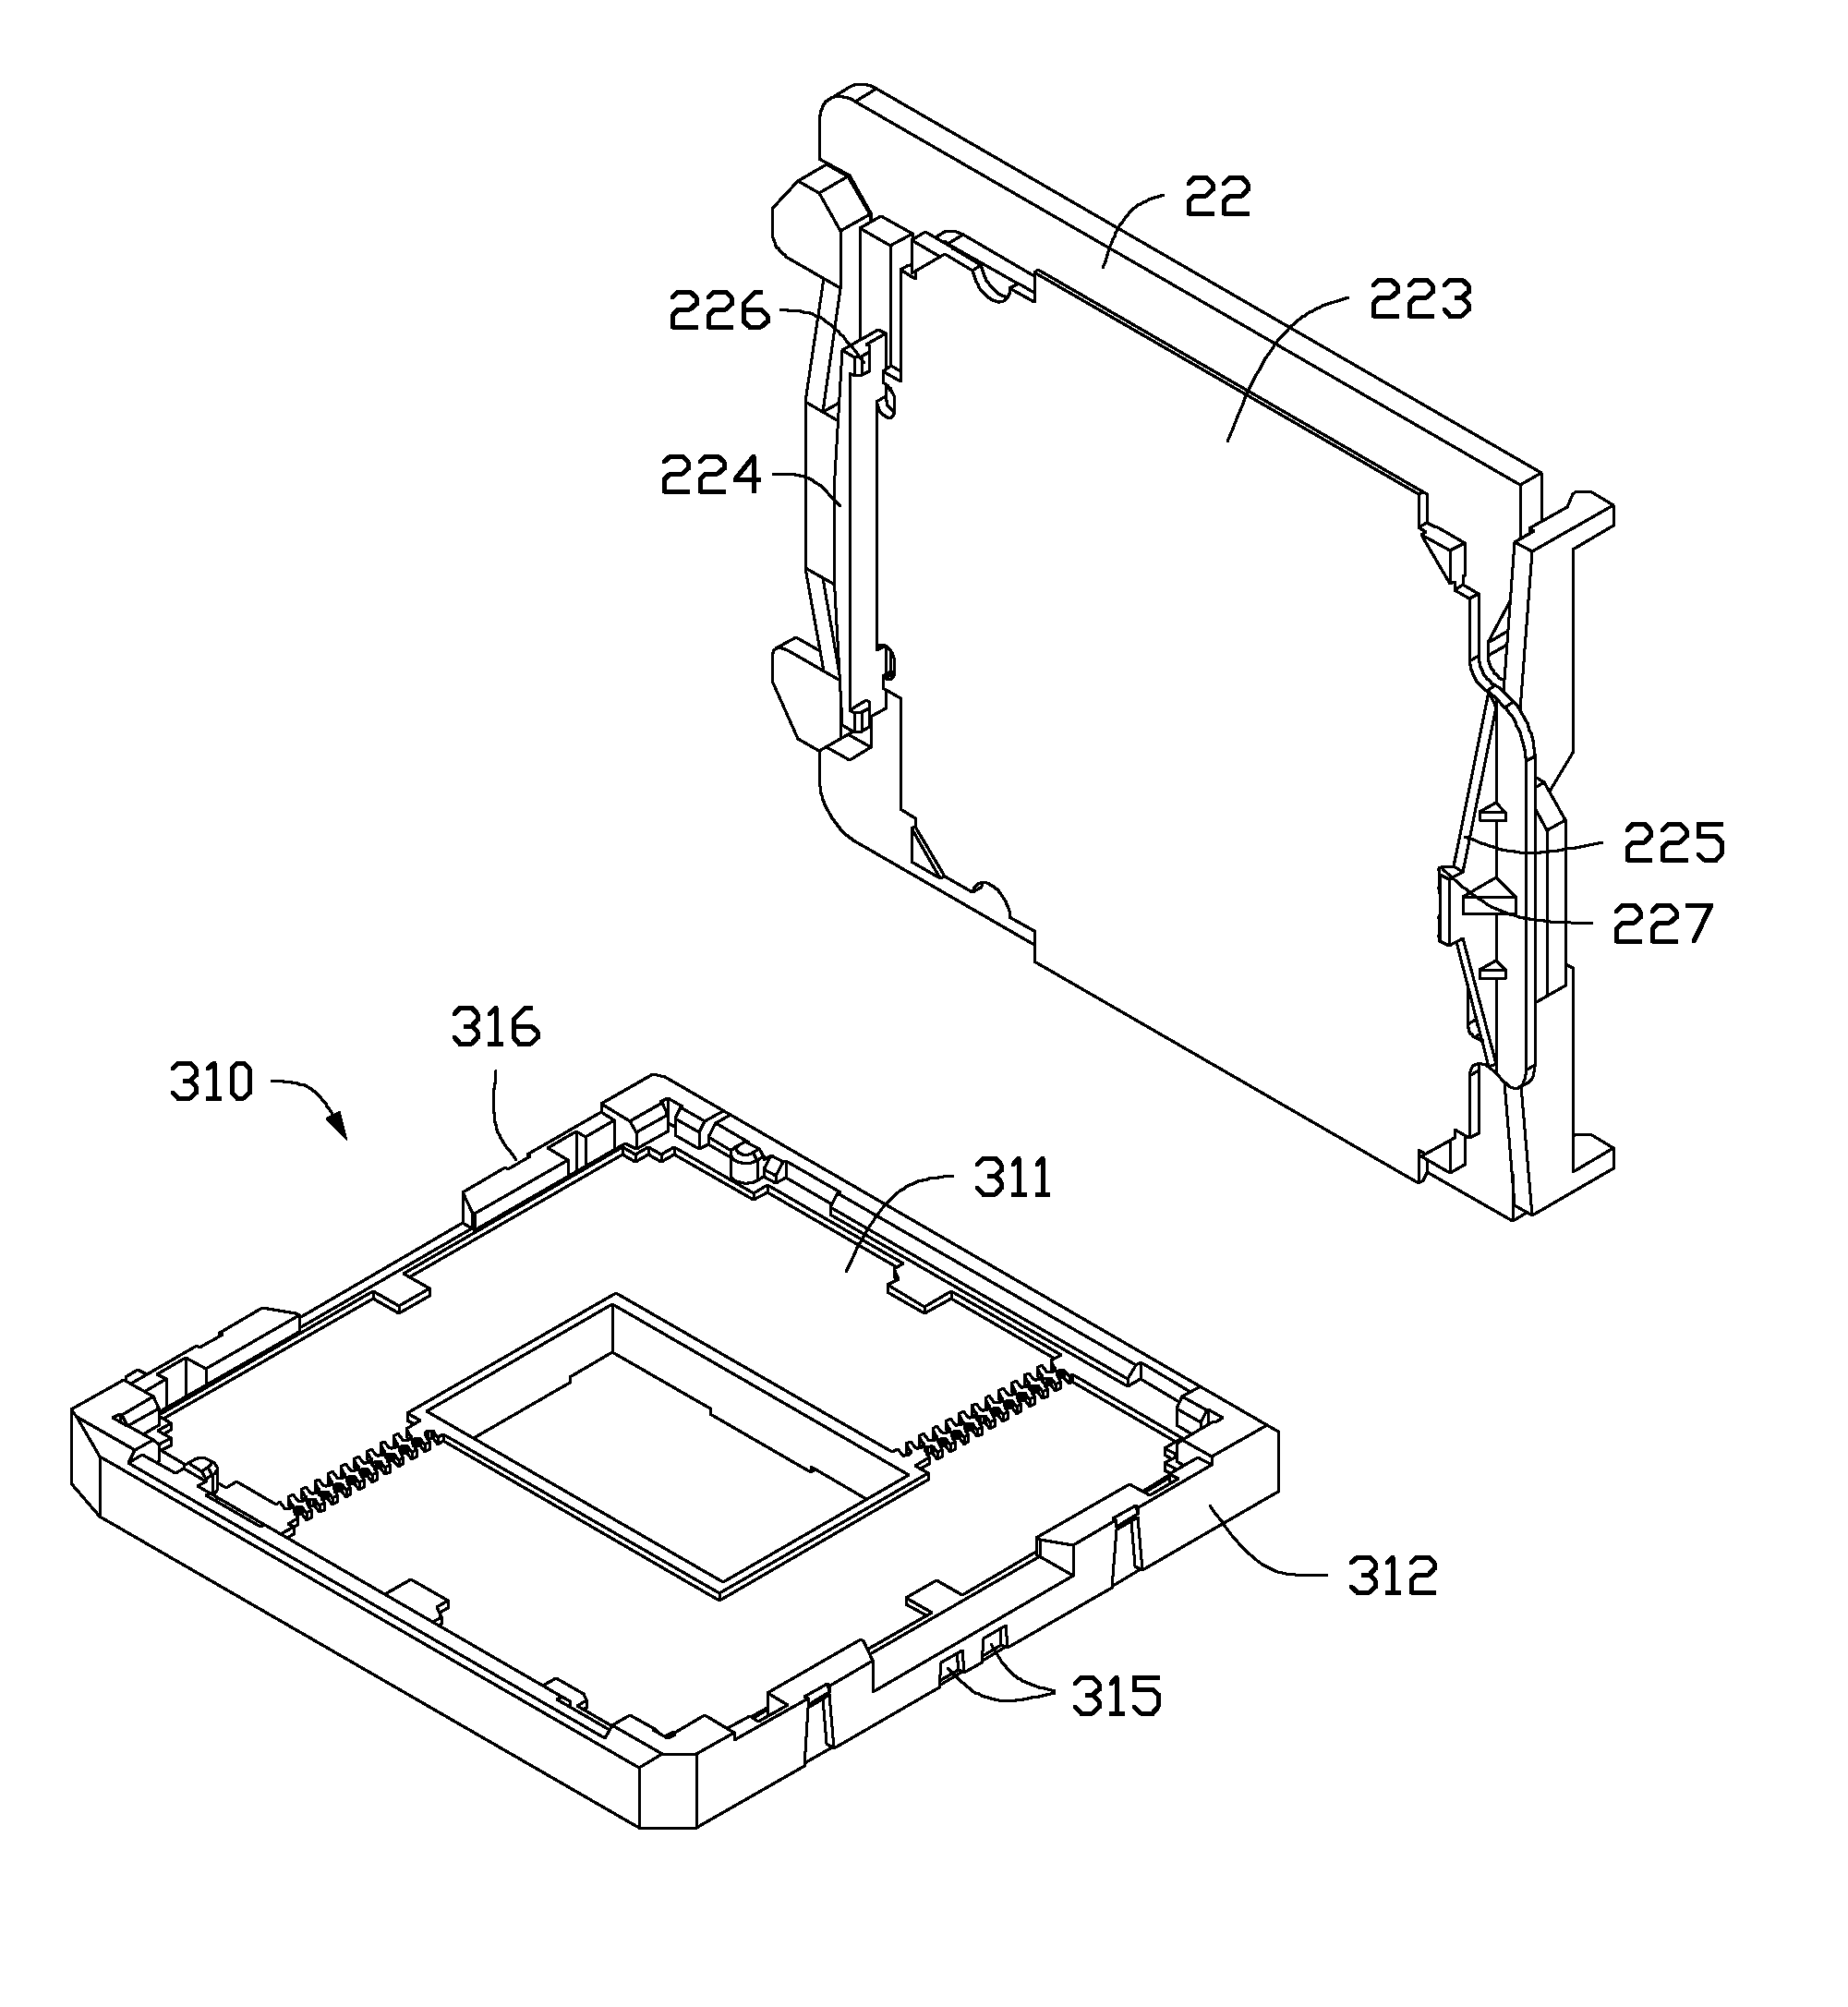 Central processing unit socket assembly